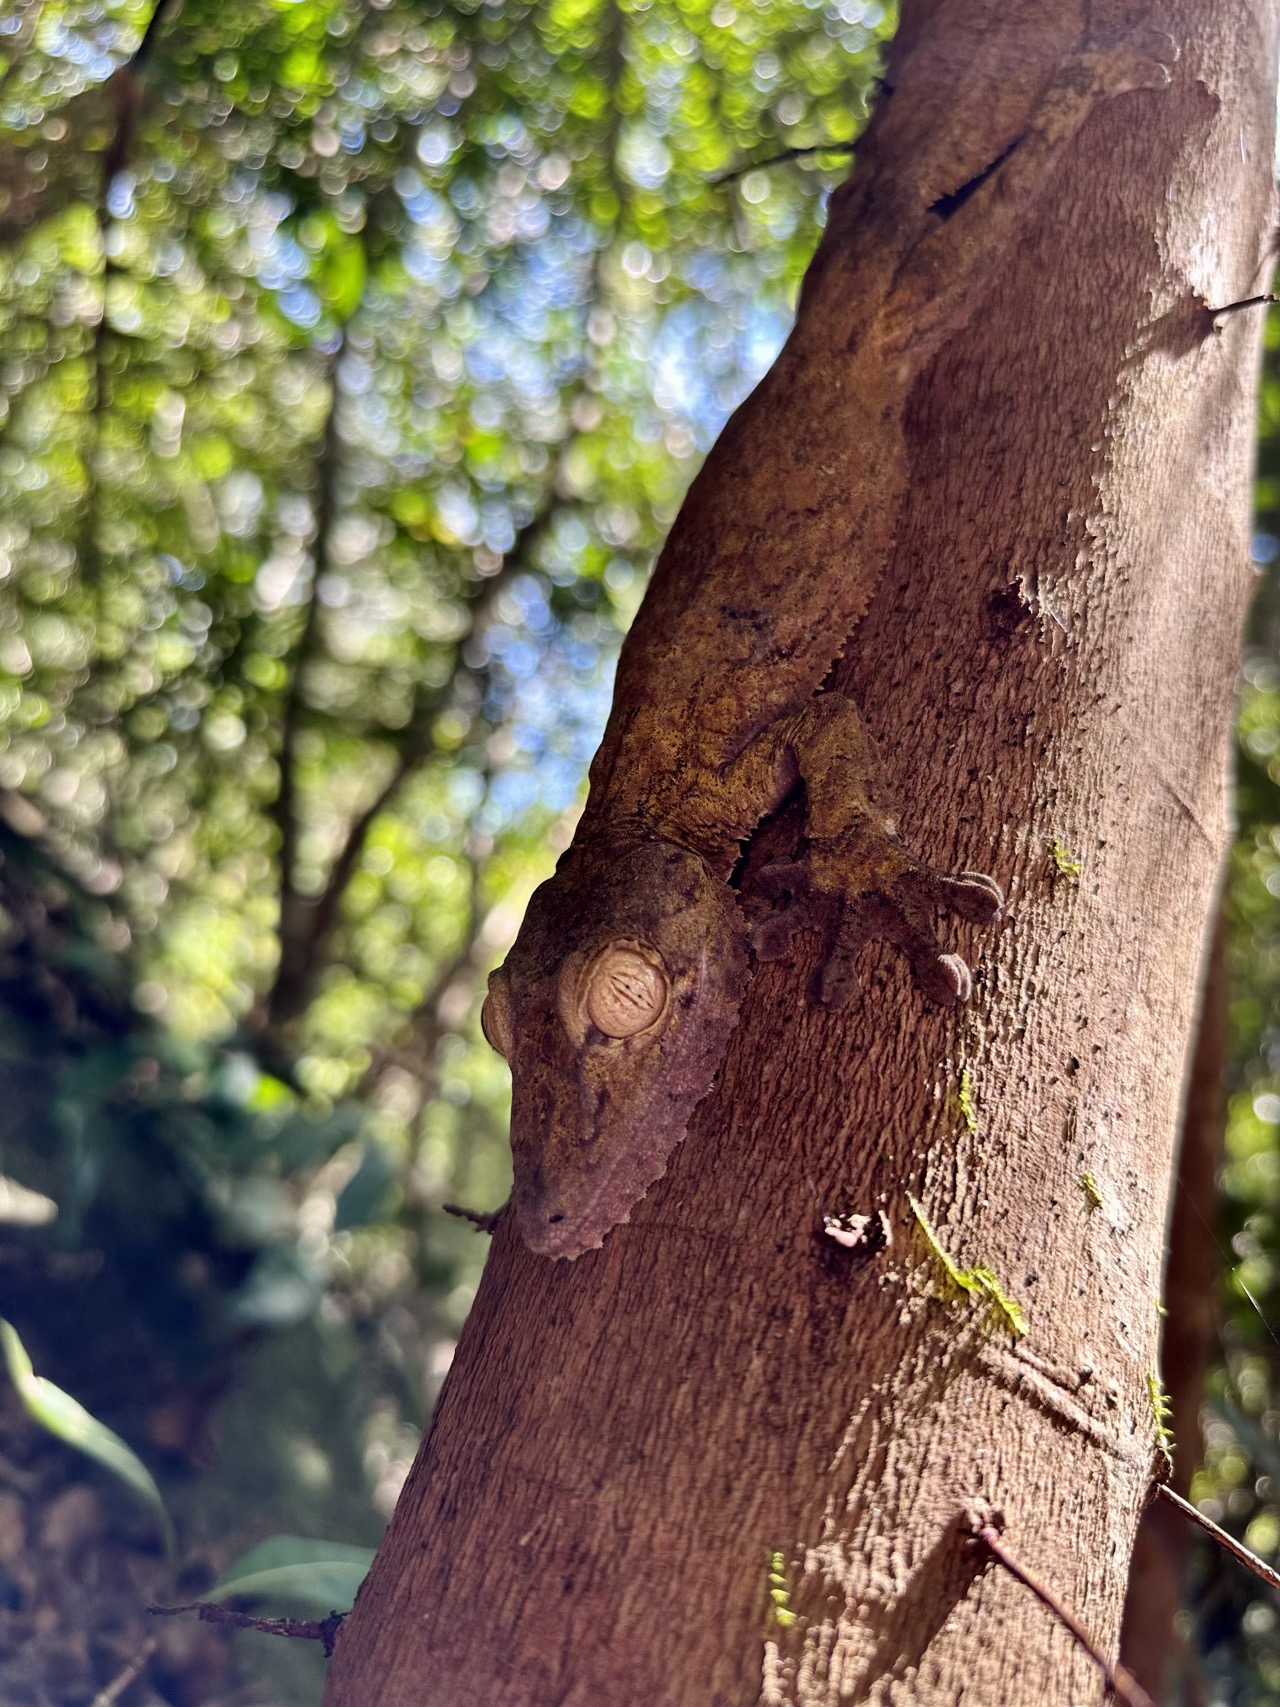 A leaf-tail gecko (they blend in so well!)